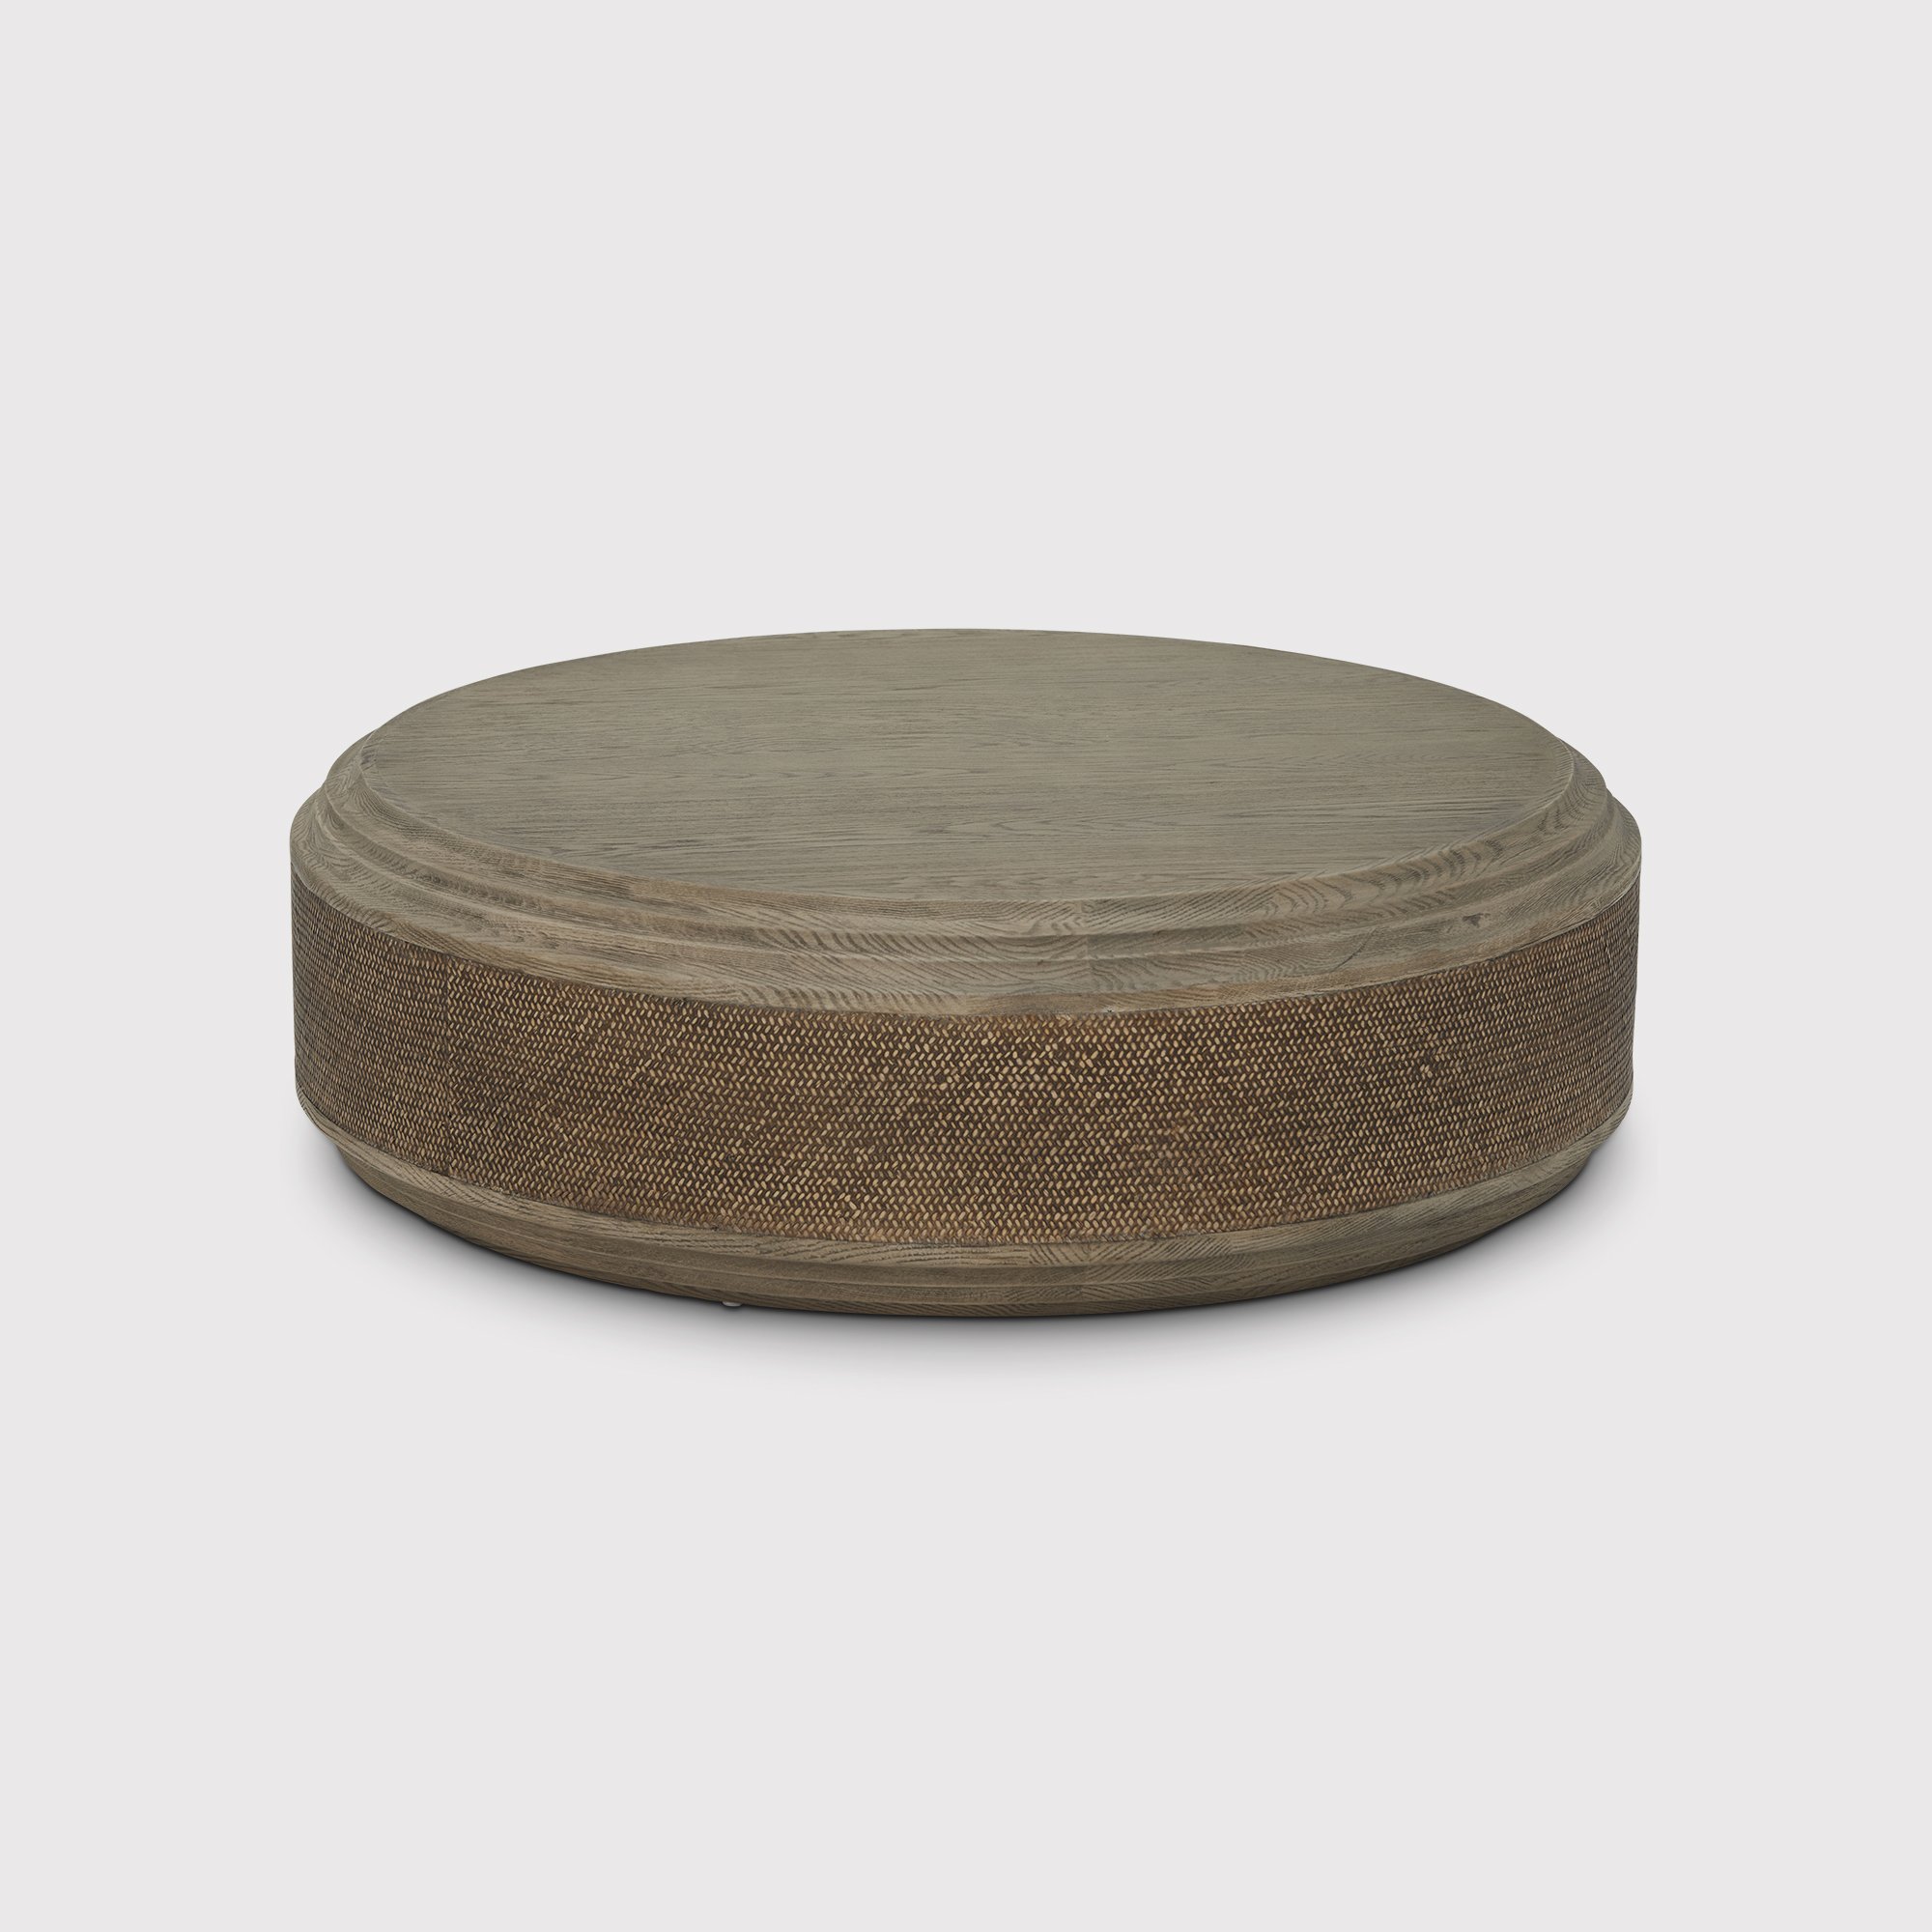 Dionne Round Coffee Table, Round, Brown Oak | Barker & Stonehouse